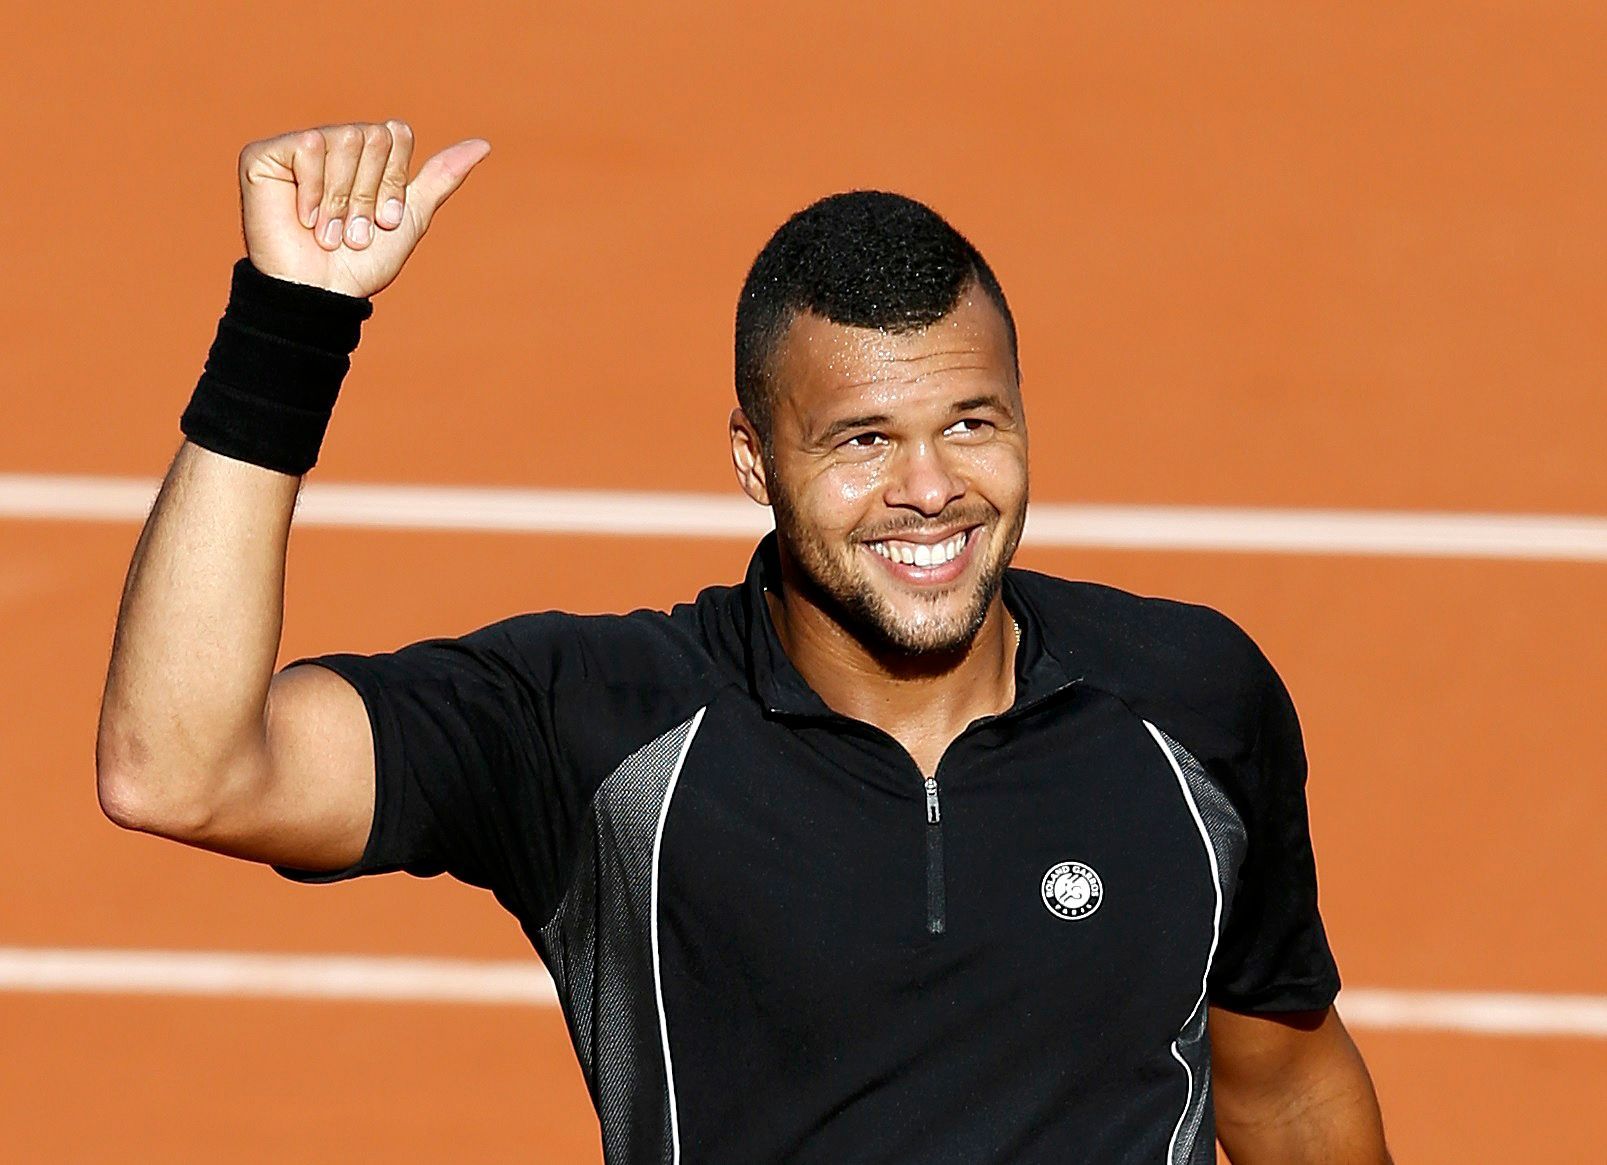 Jo-Wilfried Tsonga of France celebrates after beating Christian Lindell of Sweden during their men's singles match at the French Open tennis tournament at the Roland Garros stadium in Paris